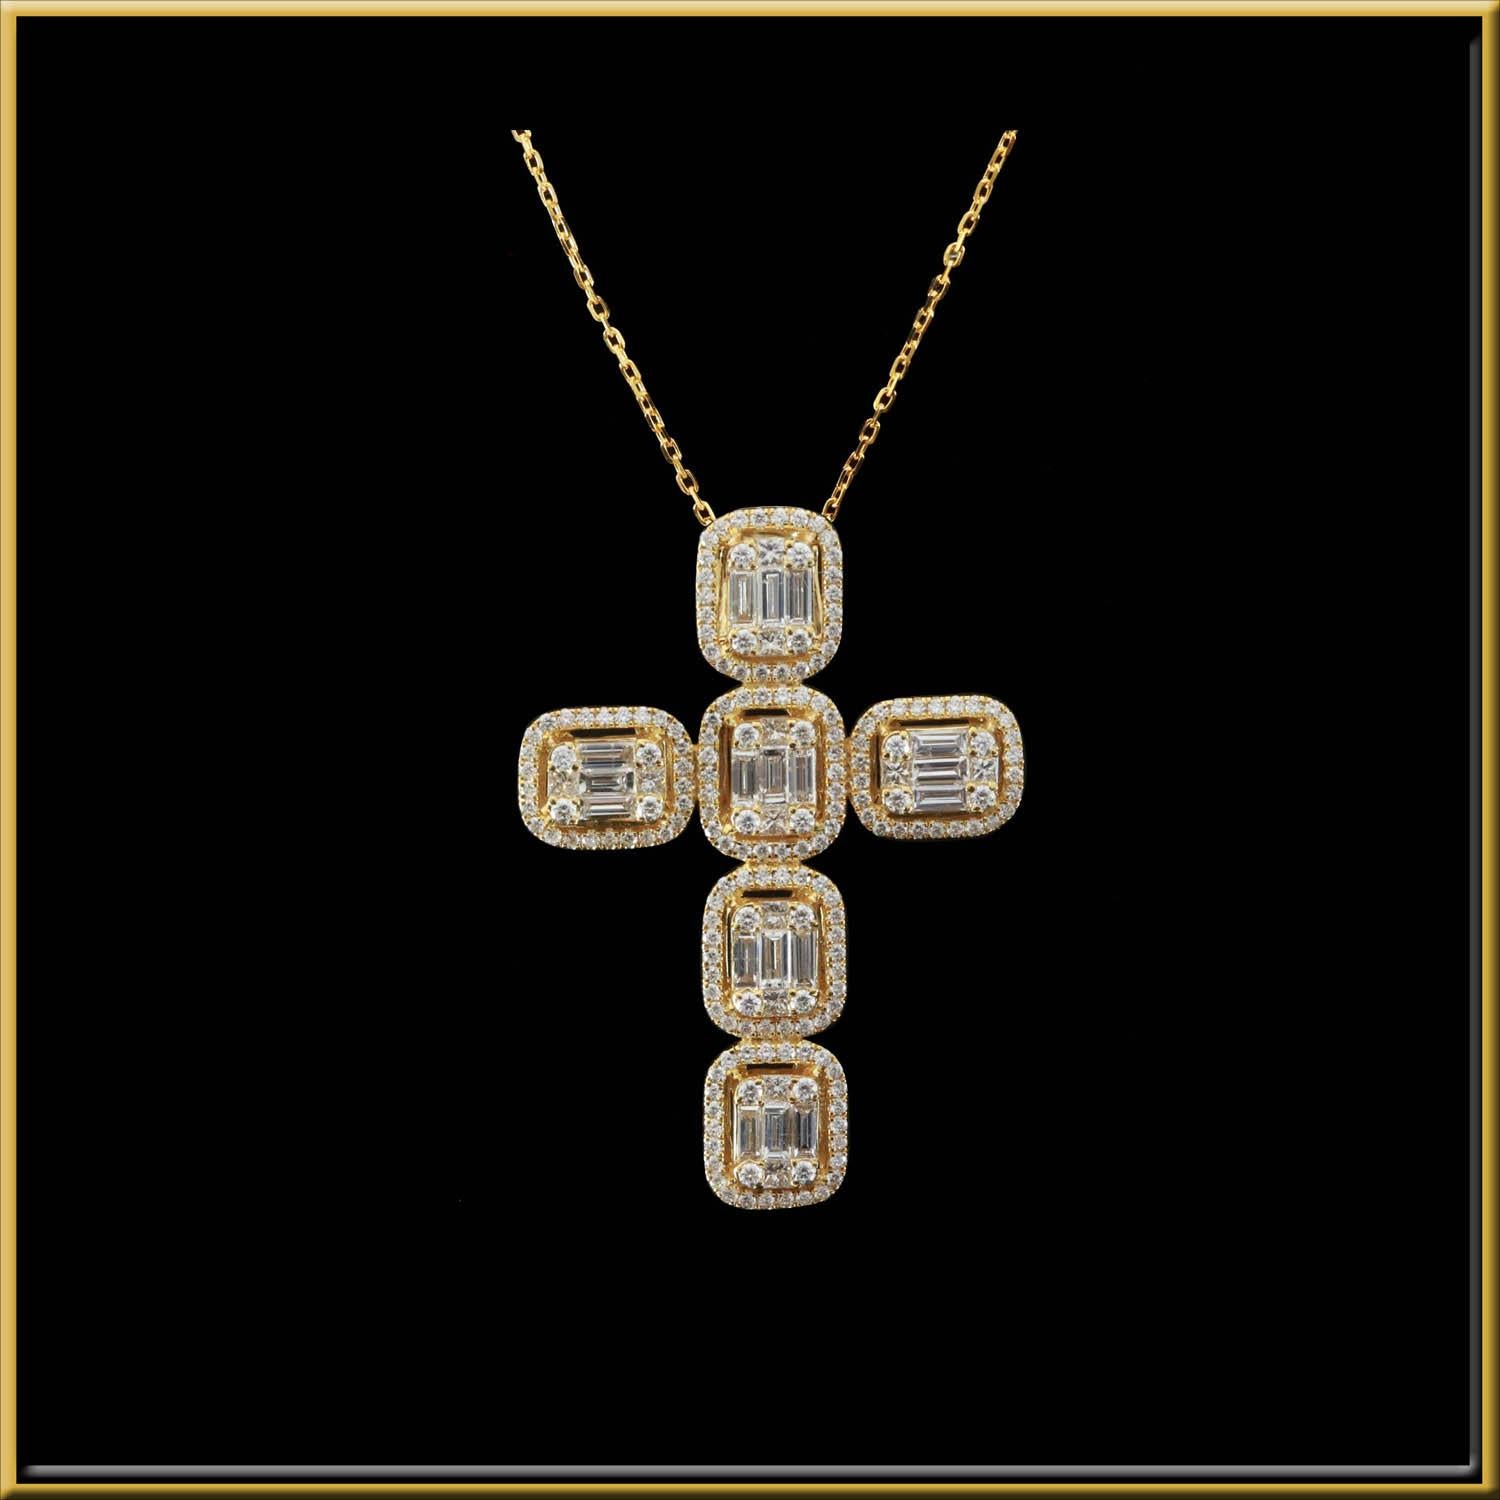 Diamond Cross necklace composed of baguette illusion emeralds, to make a large look, but at an affordable price.
It is available in 3 colors: White Gold, Rose Gold, and Yellow Gold.
The Chain is a light yet sturdy chain.
Stone Quality is VS-SI and